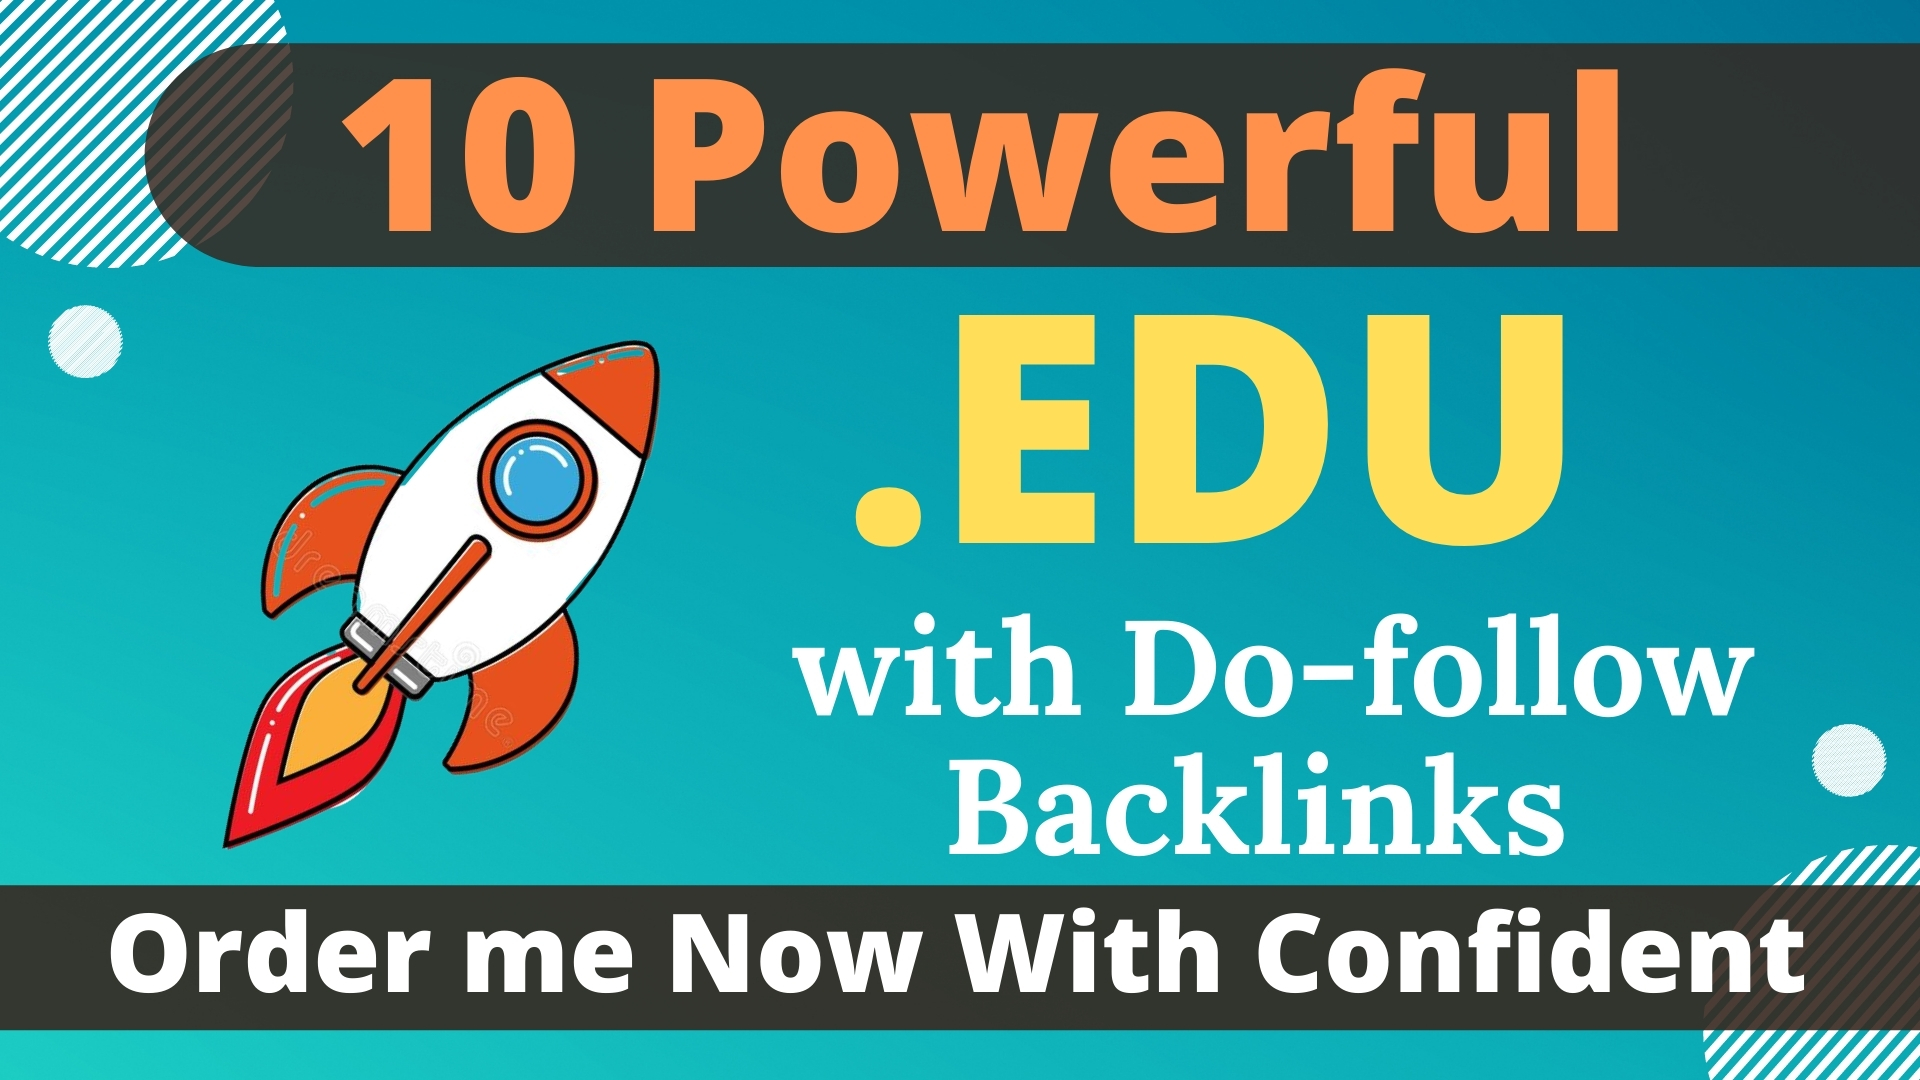 10 Powerful Profile. EDU Backlinks Manually Created from Top Rated Universities with Quick Delivery 